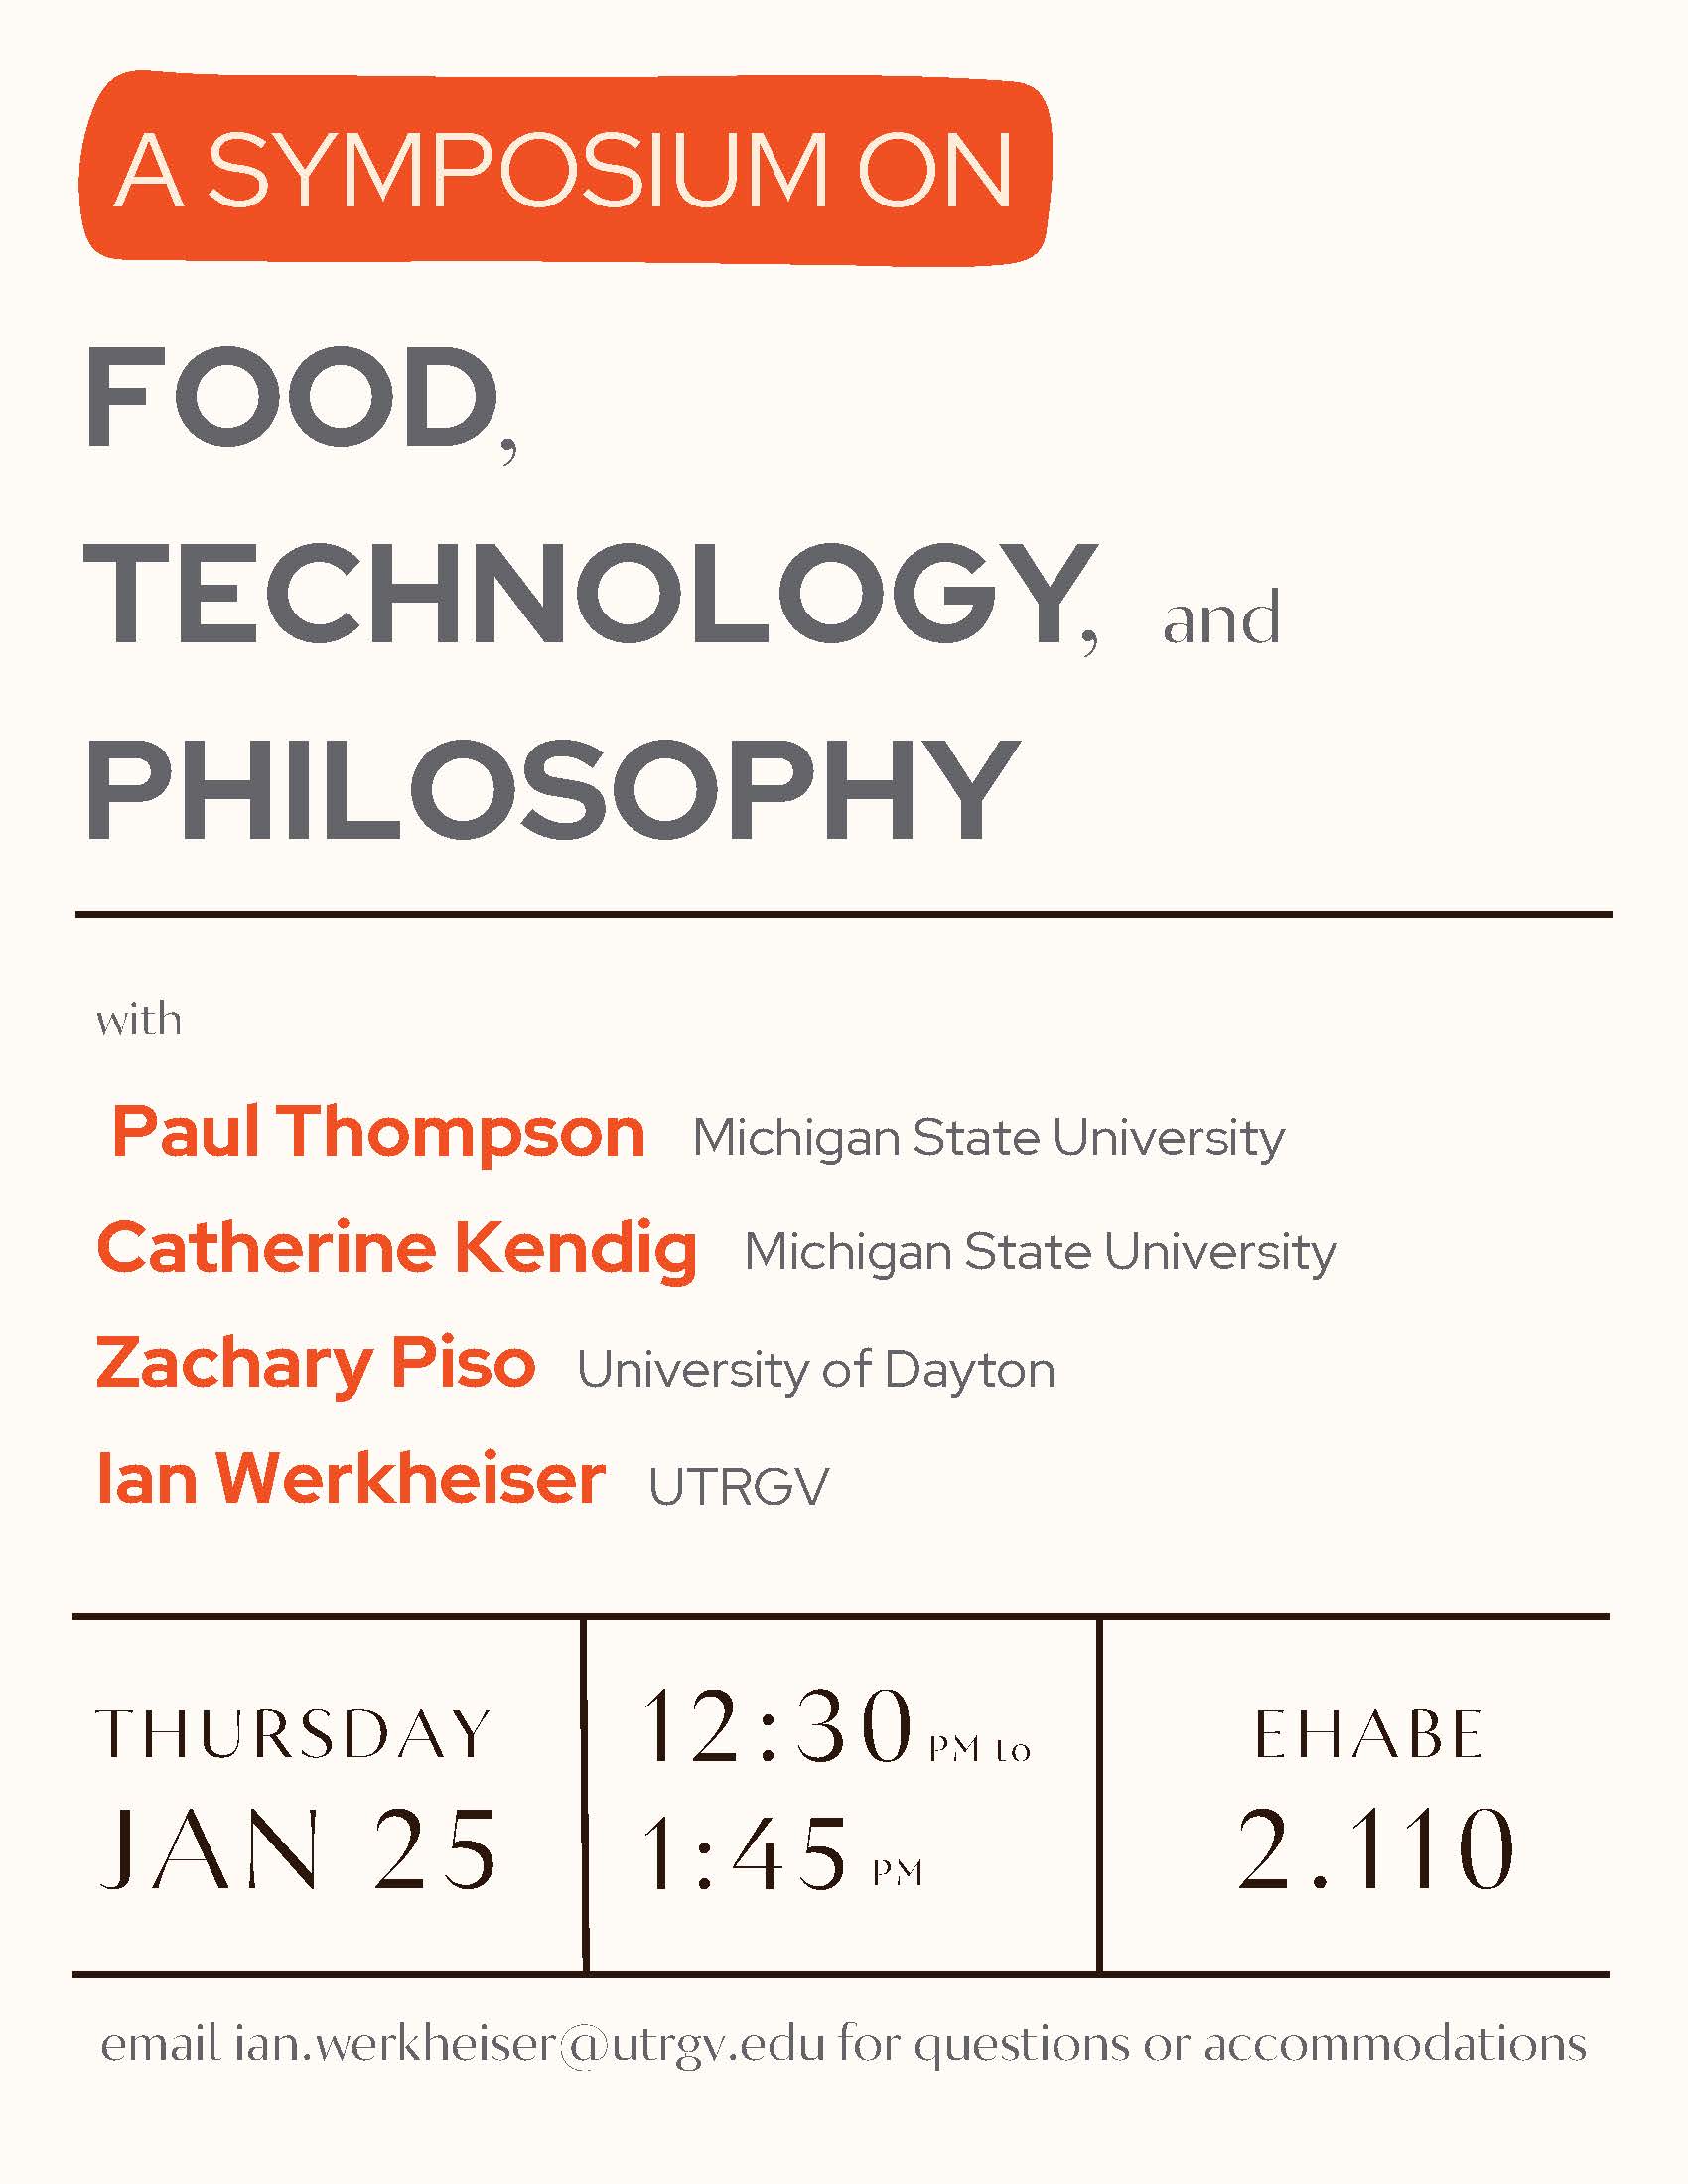 Dr. Ian Werkheiser is hosting a Symposium on Food, Technology, and Philosophy! 